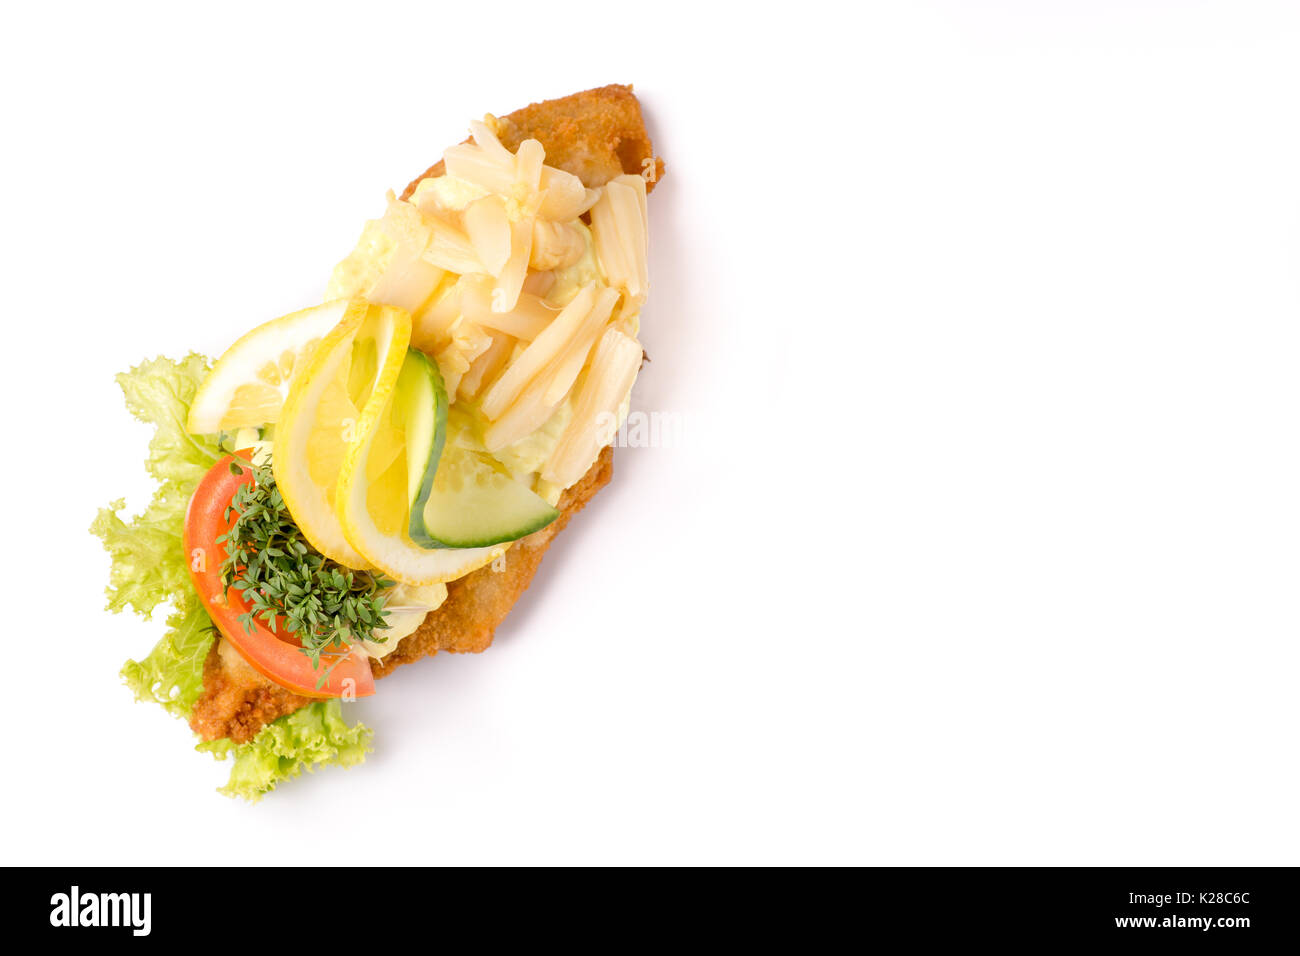 Danish specialties and national dishes, high-quality open sandwich, isolated on white background. fish fillet and garnished with remoulade and lemon Stock Photo